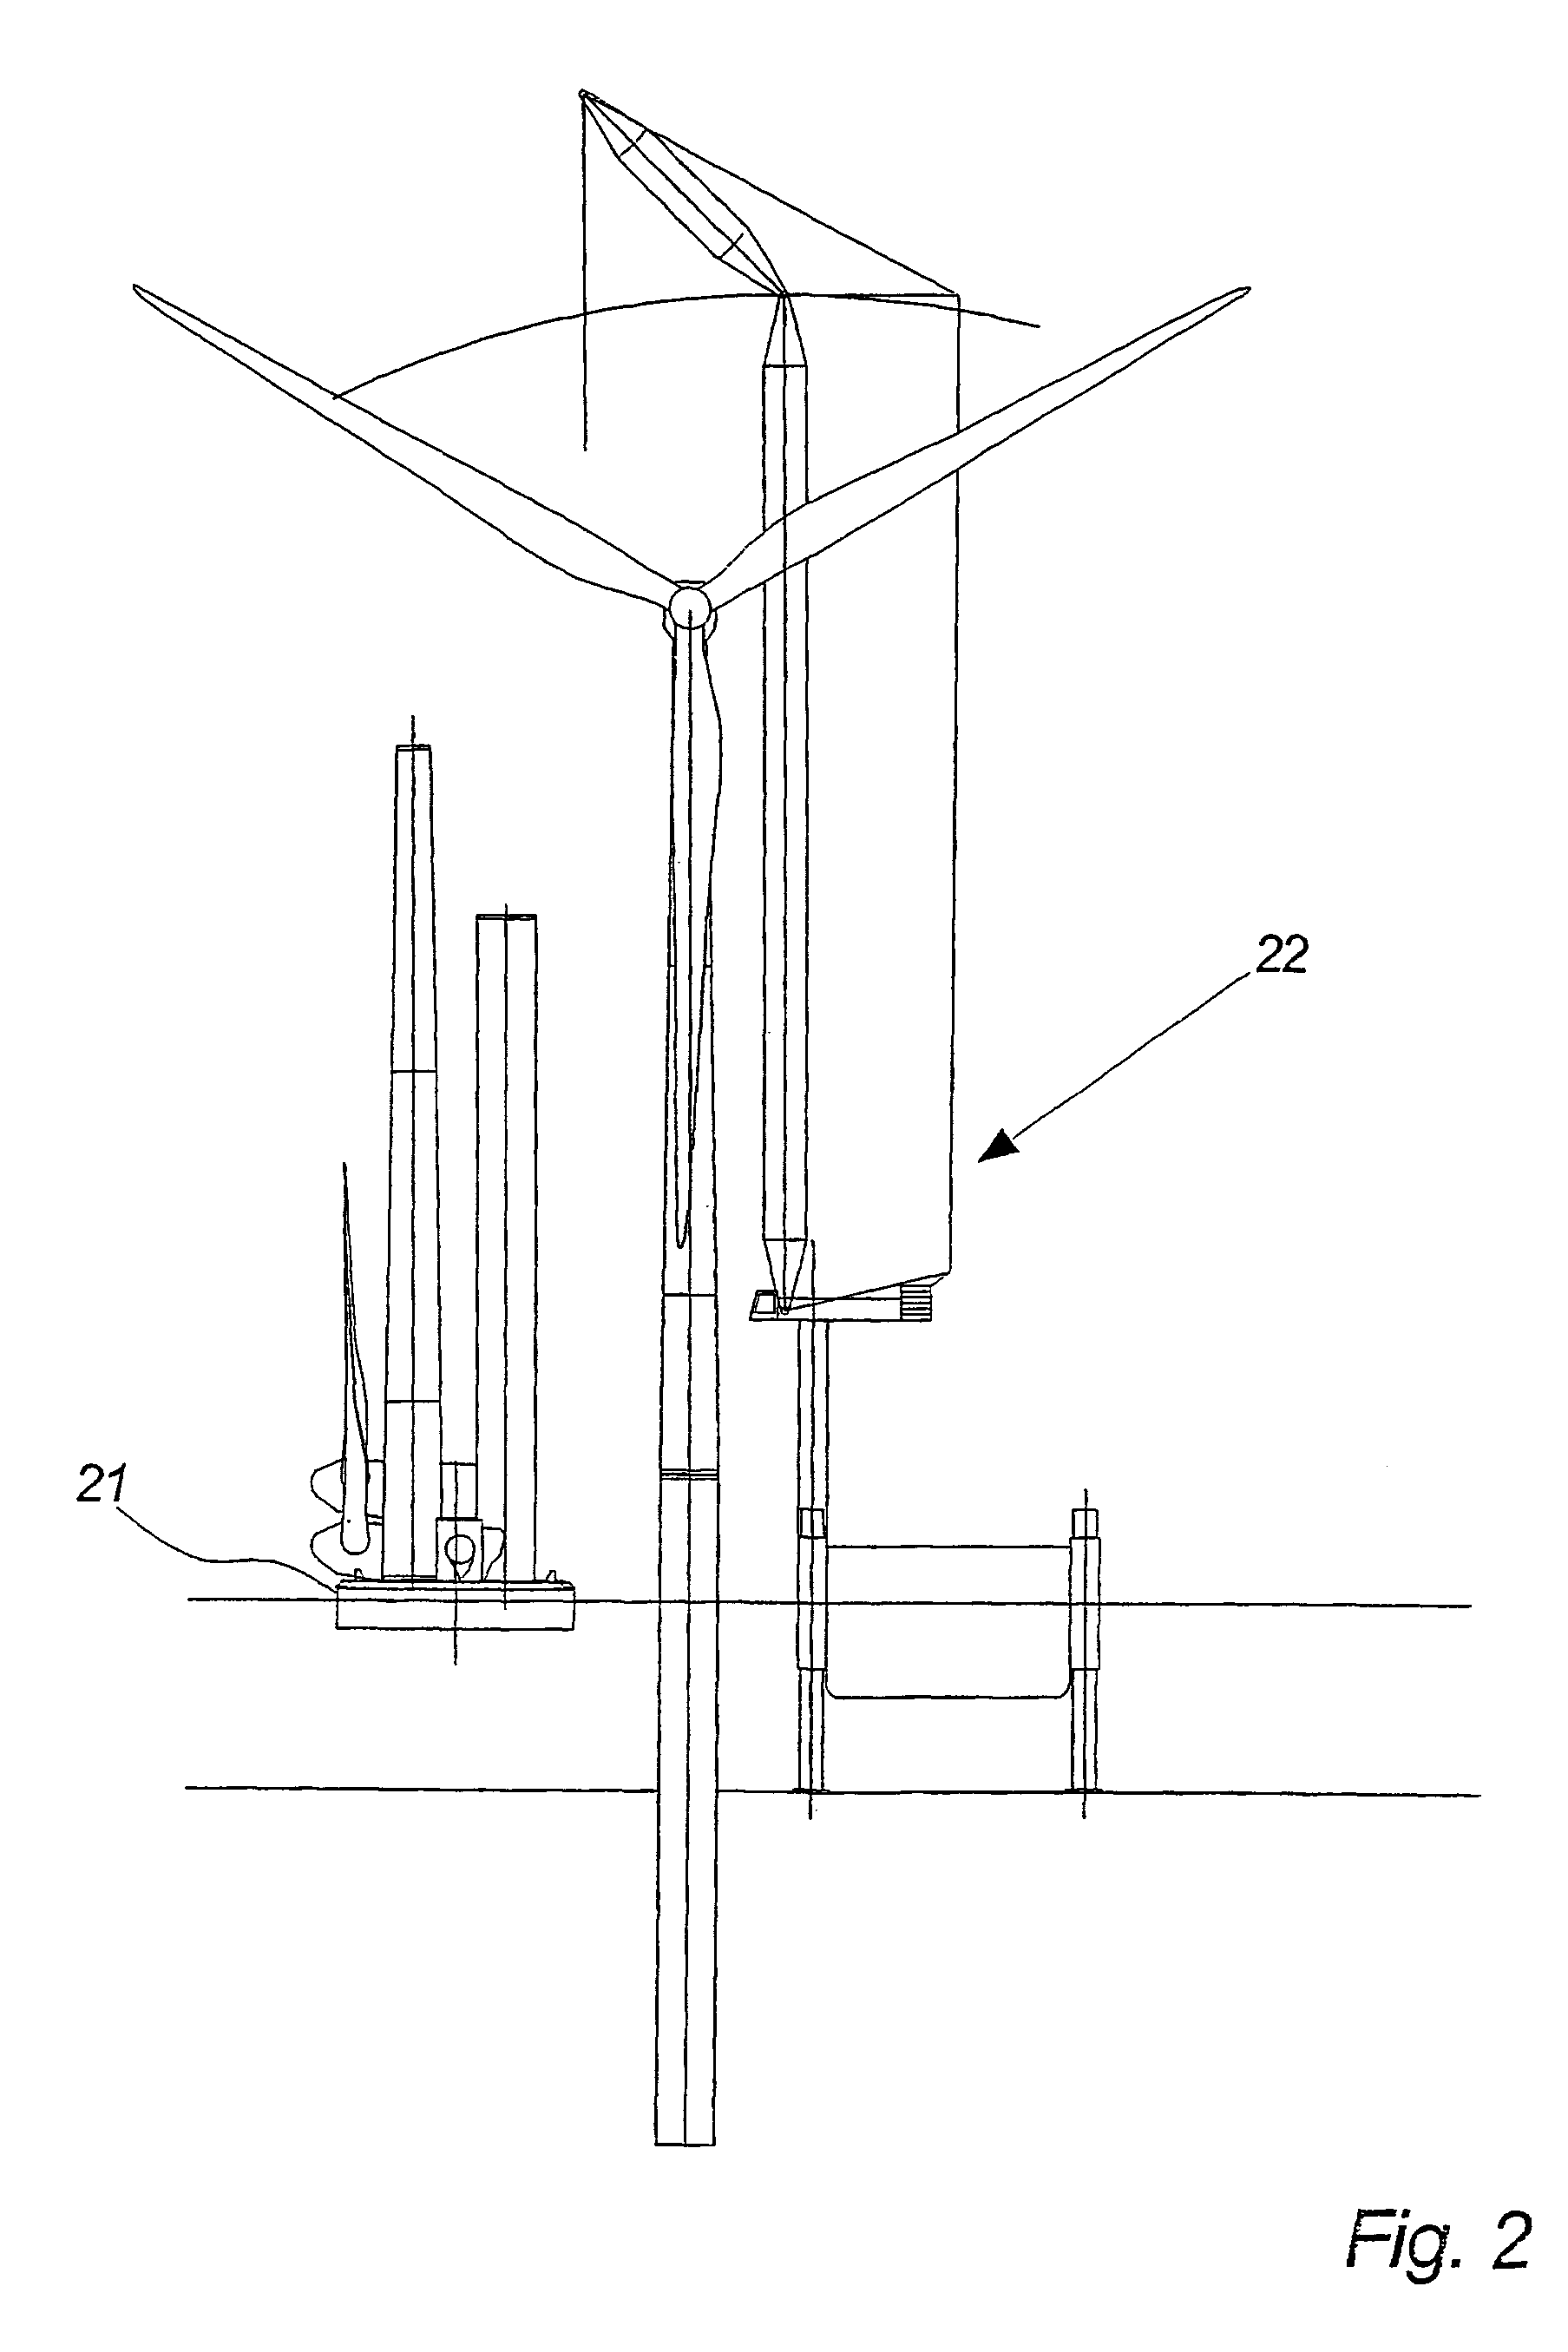 Methods of mounting a wind turbine, a wind turbine foundation and a wind turbine assembly